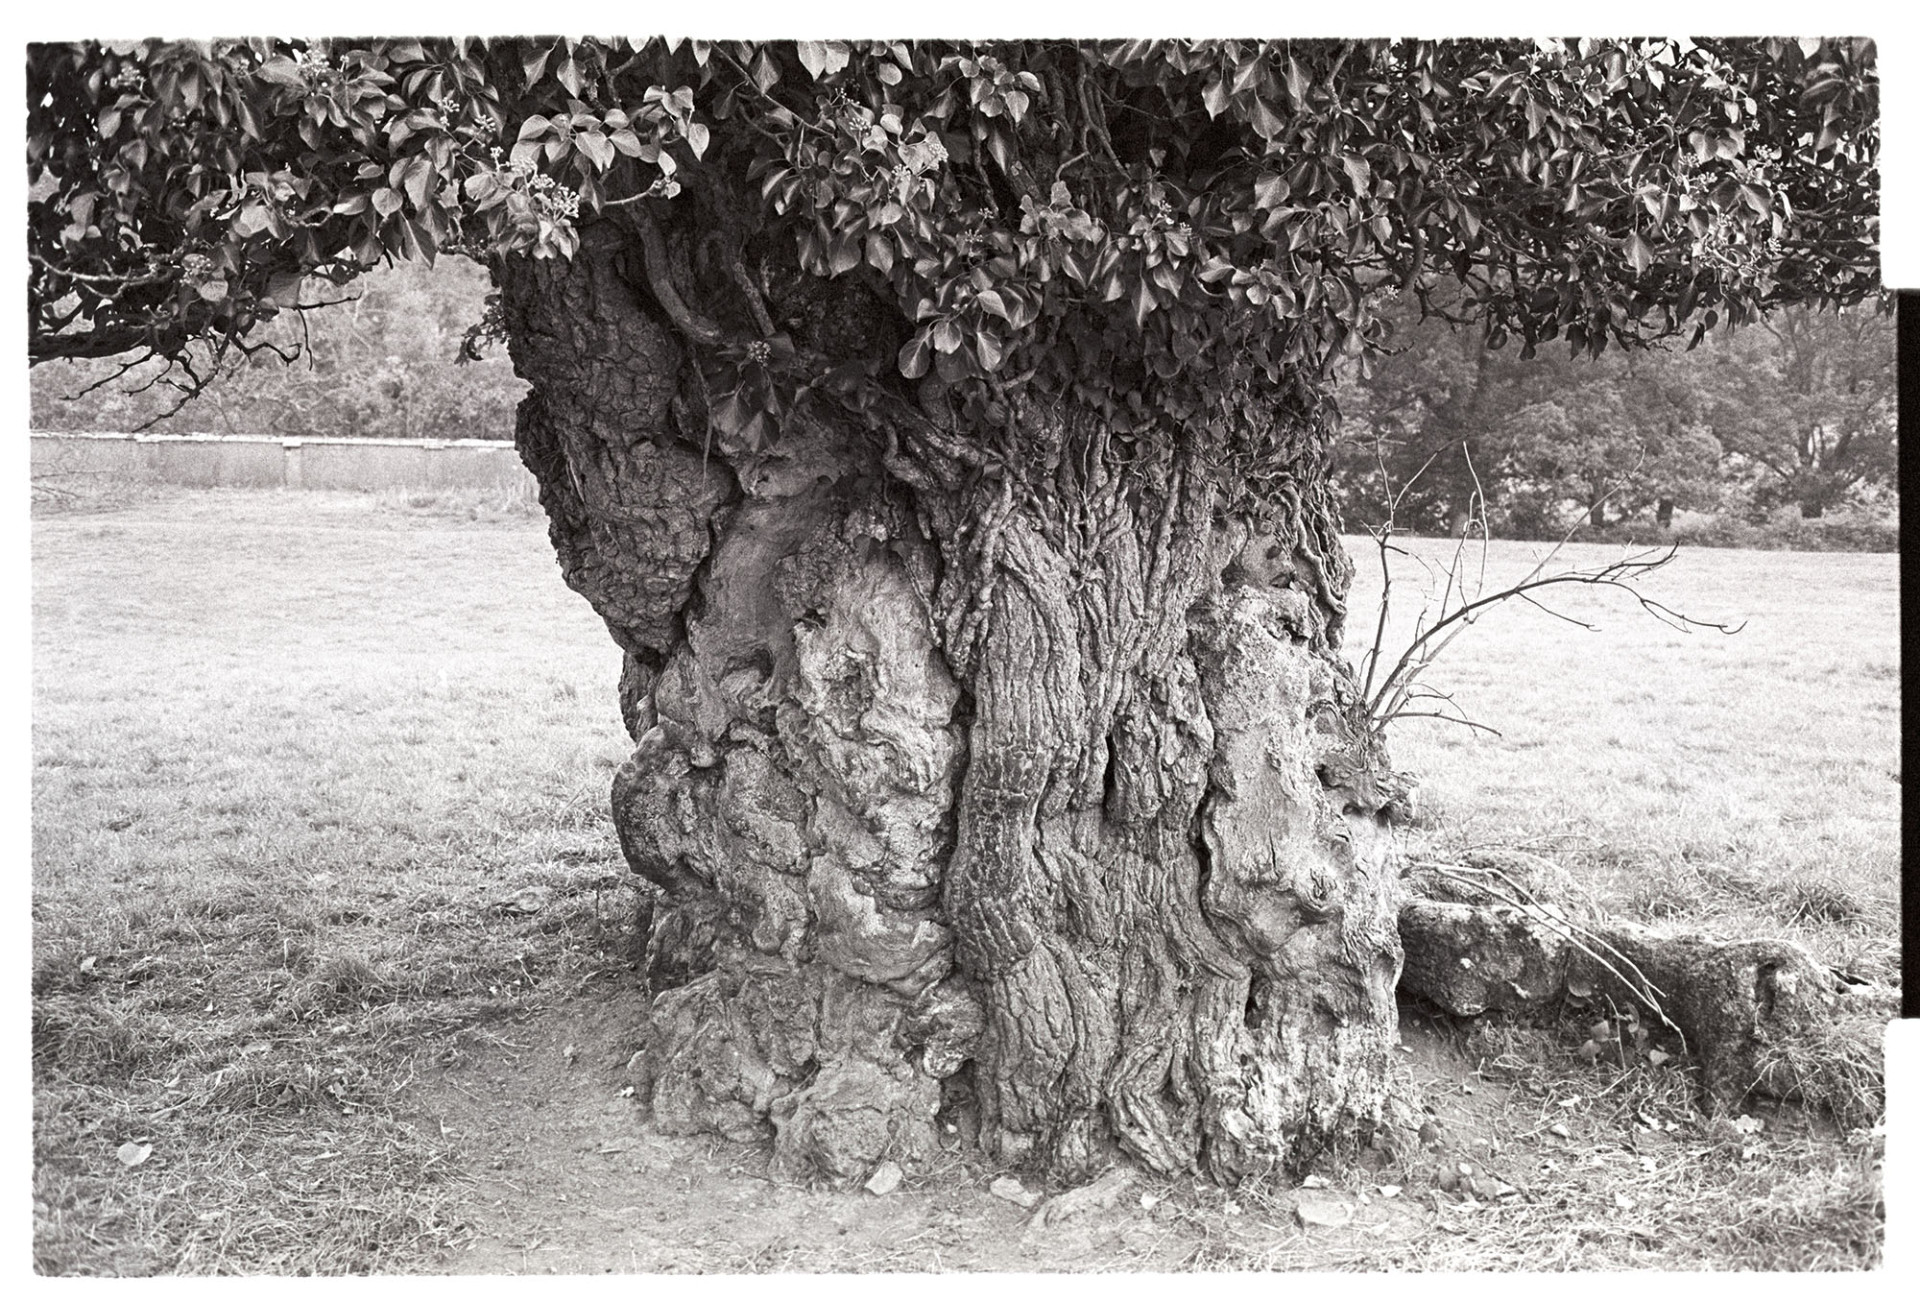 Gnarled trunk of oak tree. 
[An oak tree with a gnarled trunk at Kings Nympton Park]